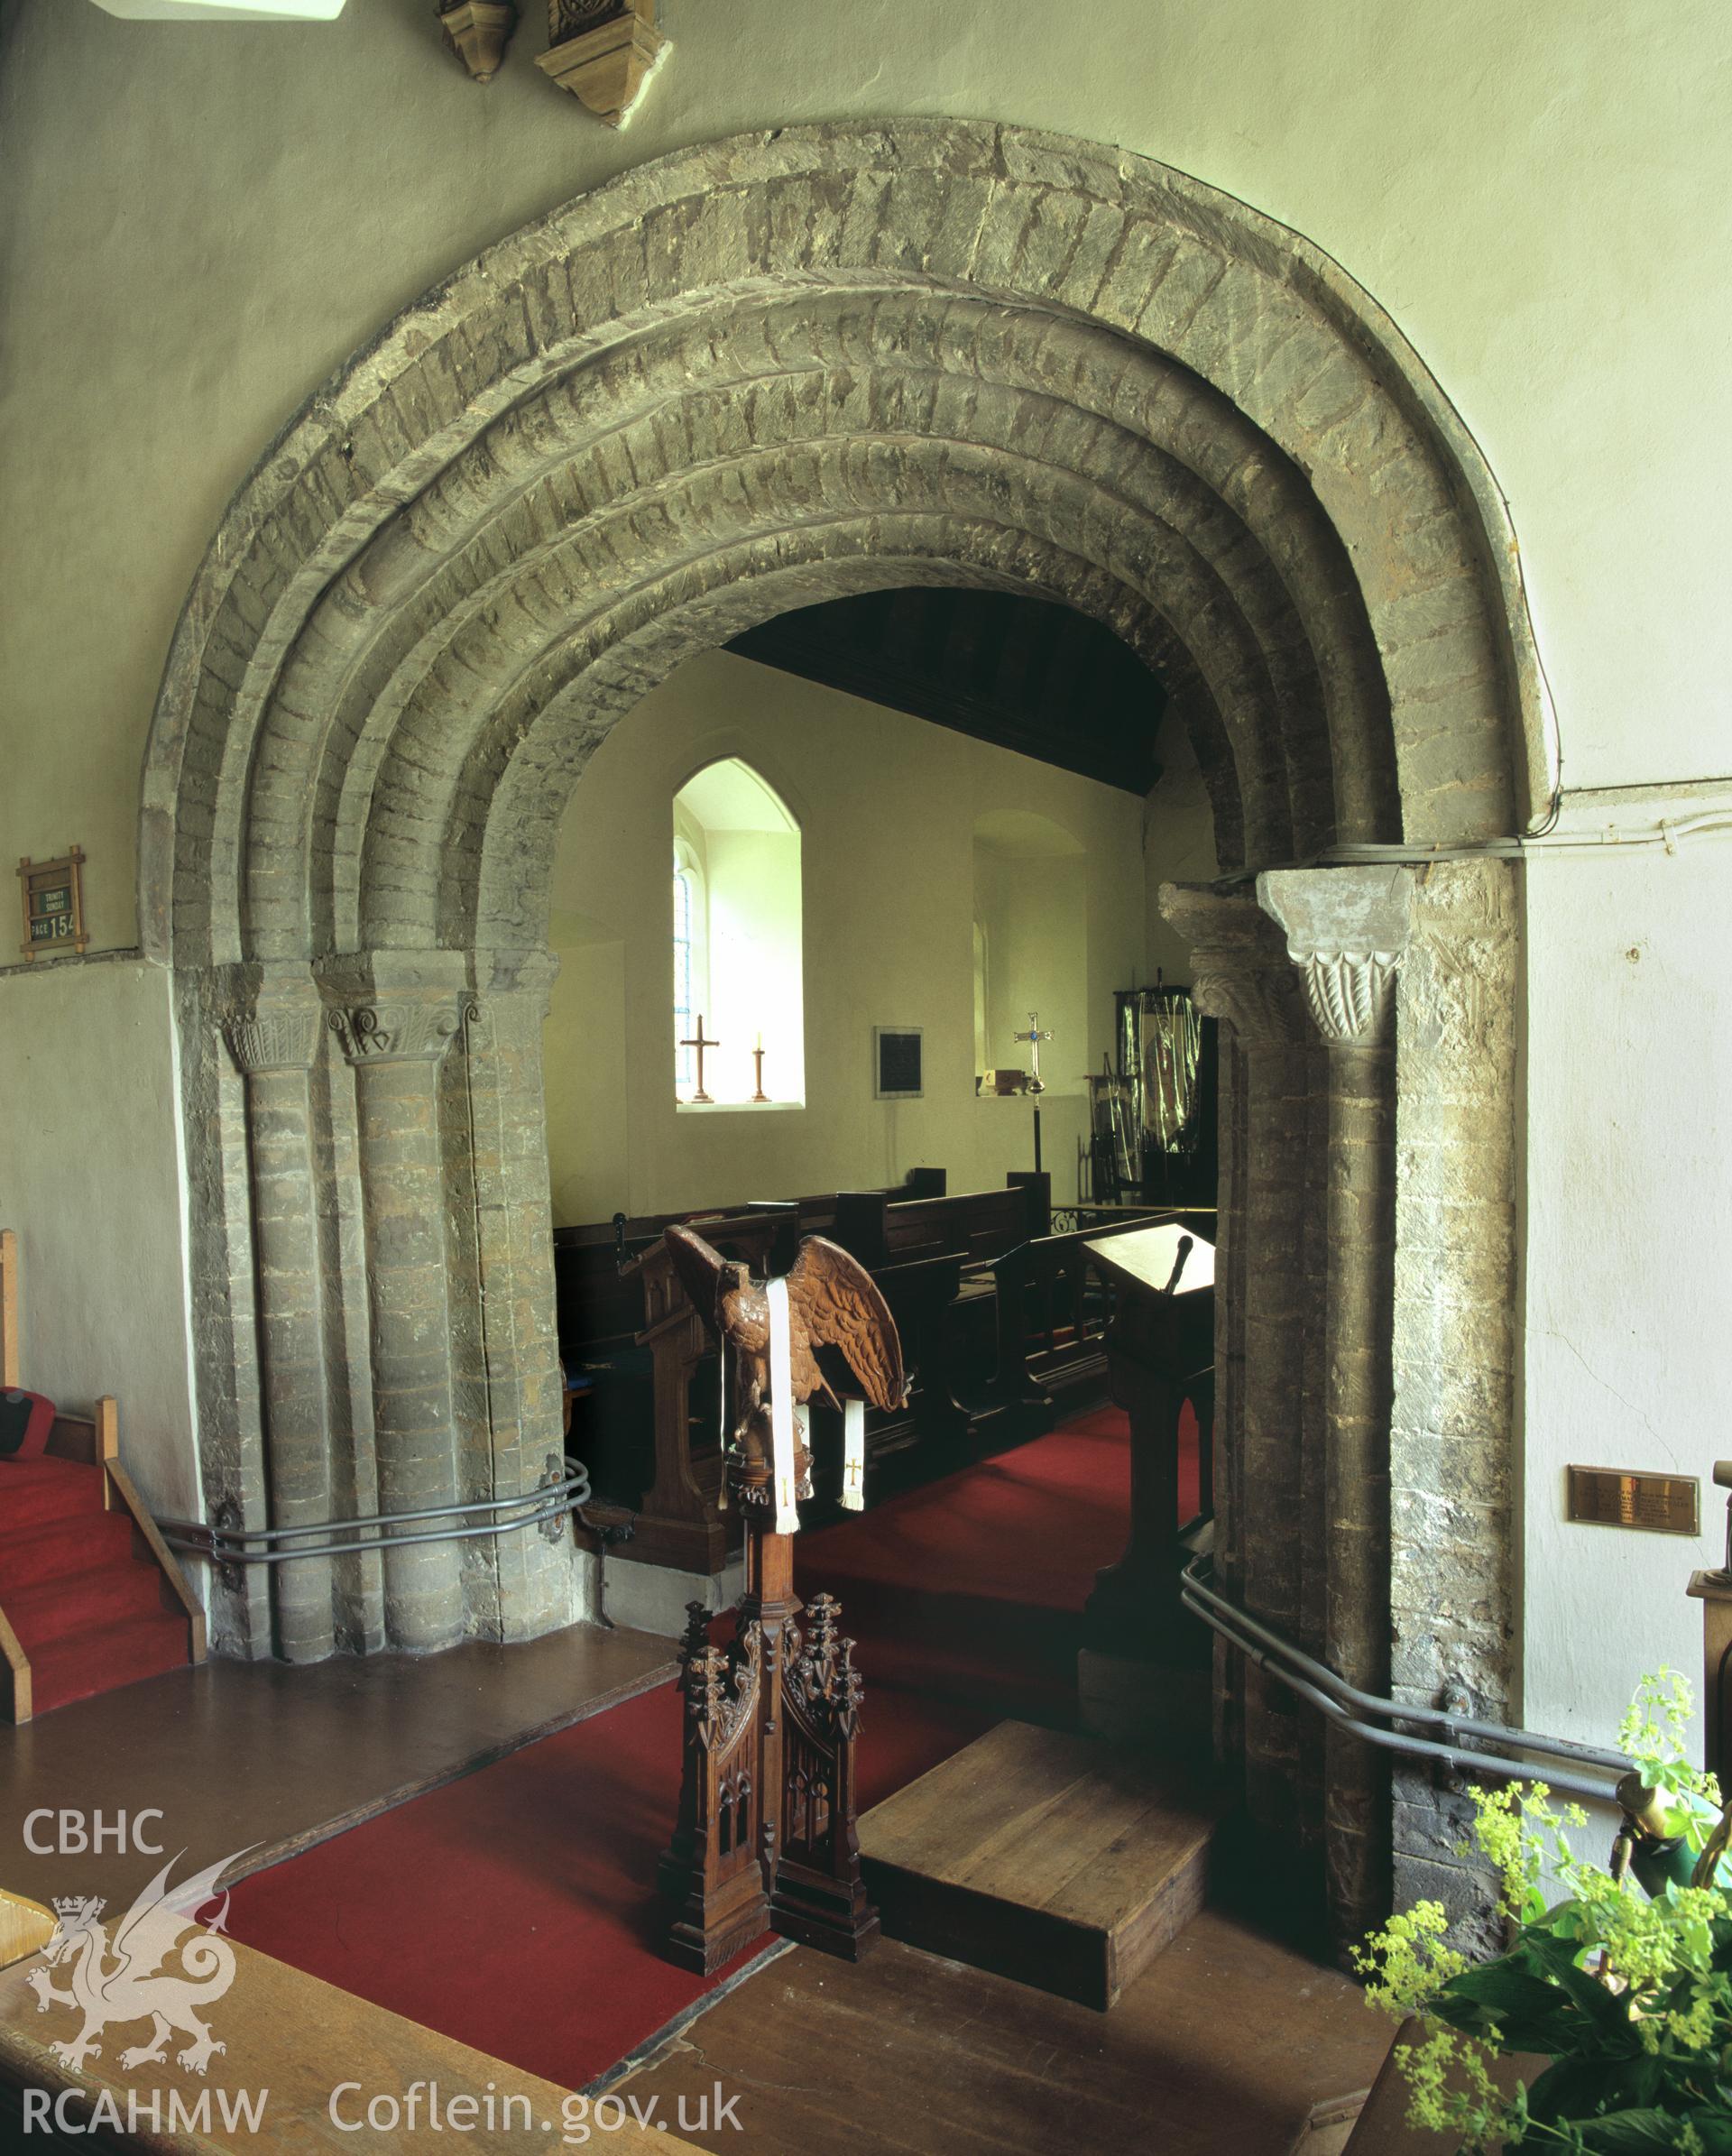 Colour transparency showing view of the chancel arch at St Mary Magdalene's Church, St Clears, produced by Iain Wright, June 2004.